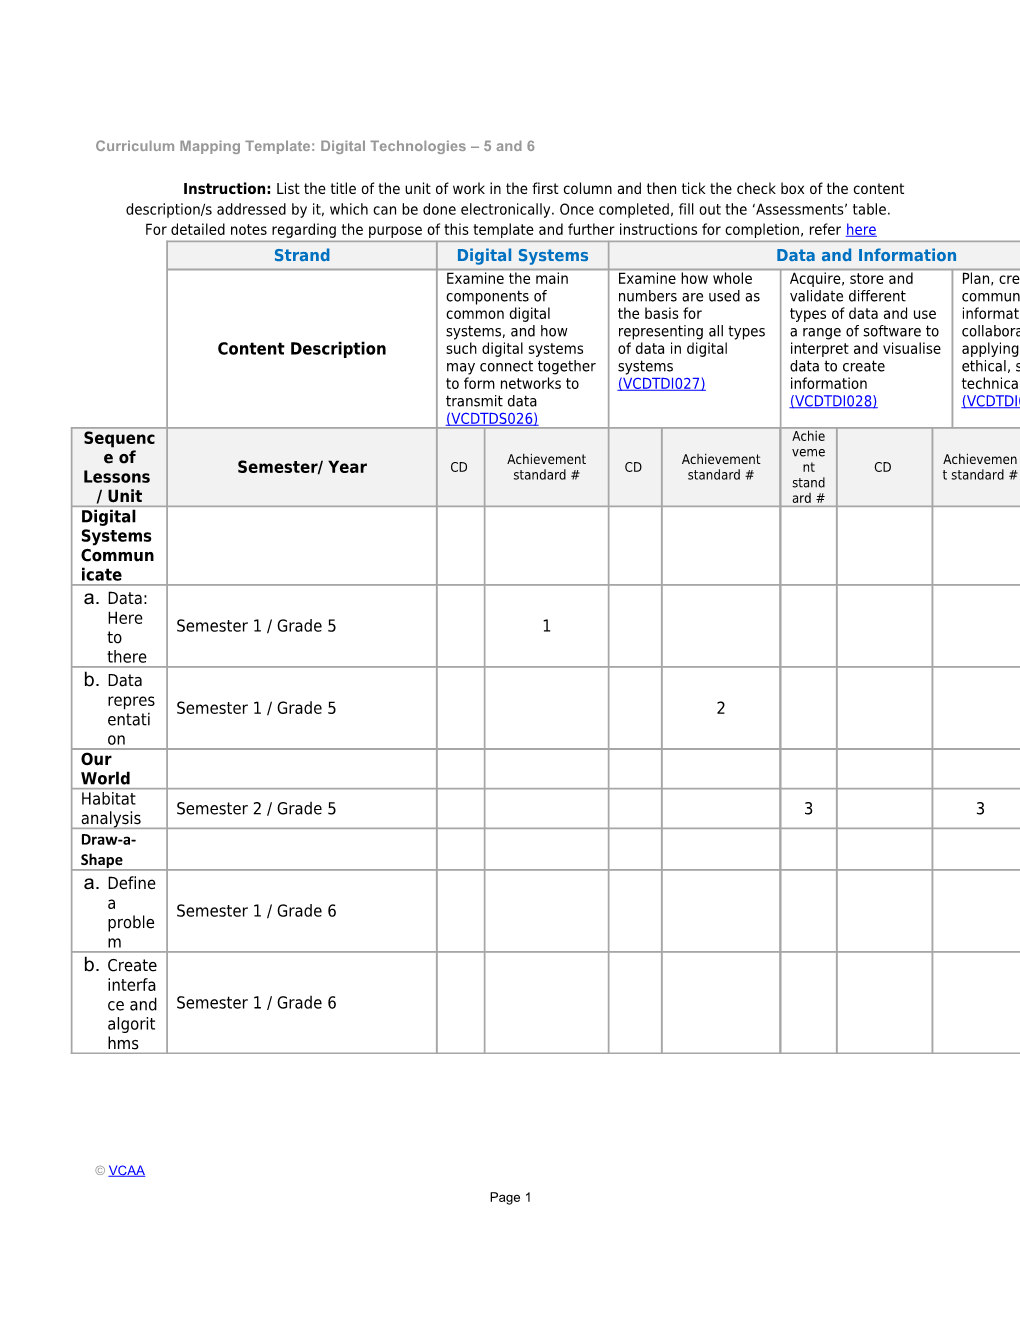 Curriculum Mapping Template: Digital Technologies 5 and 6